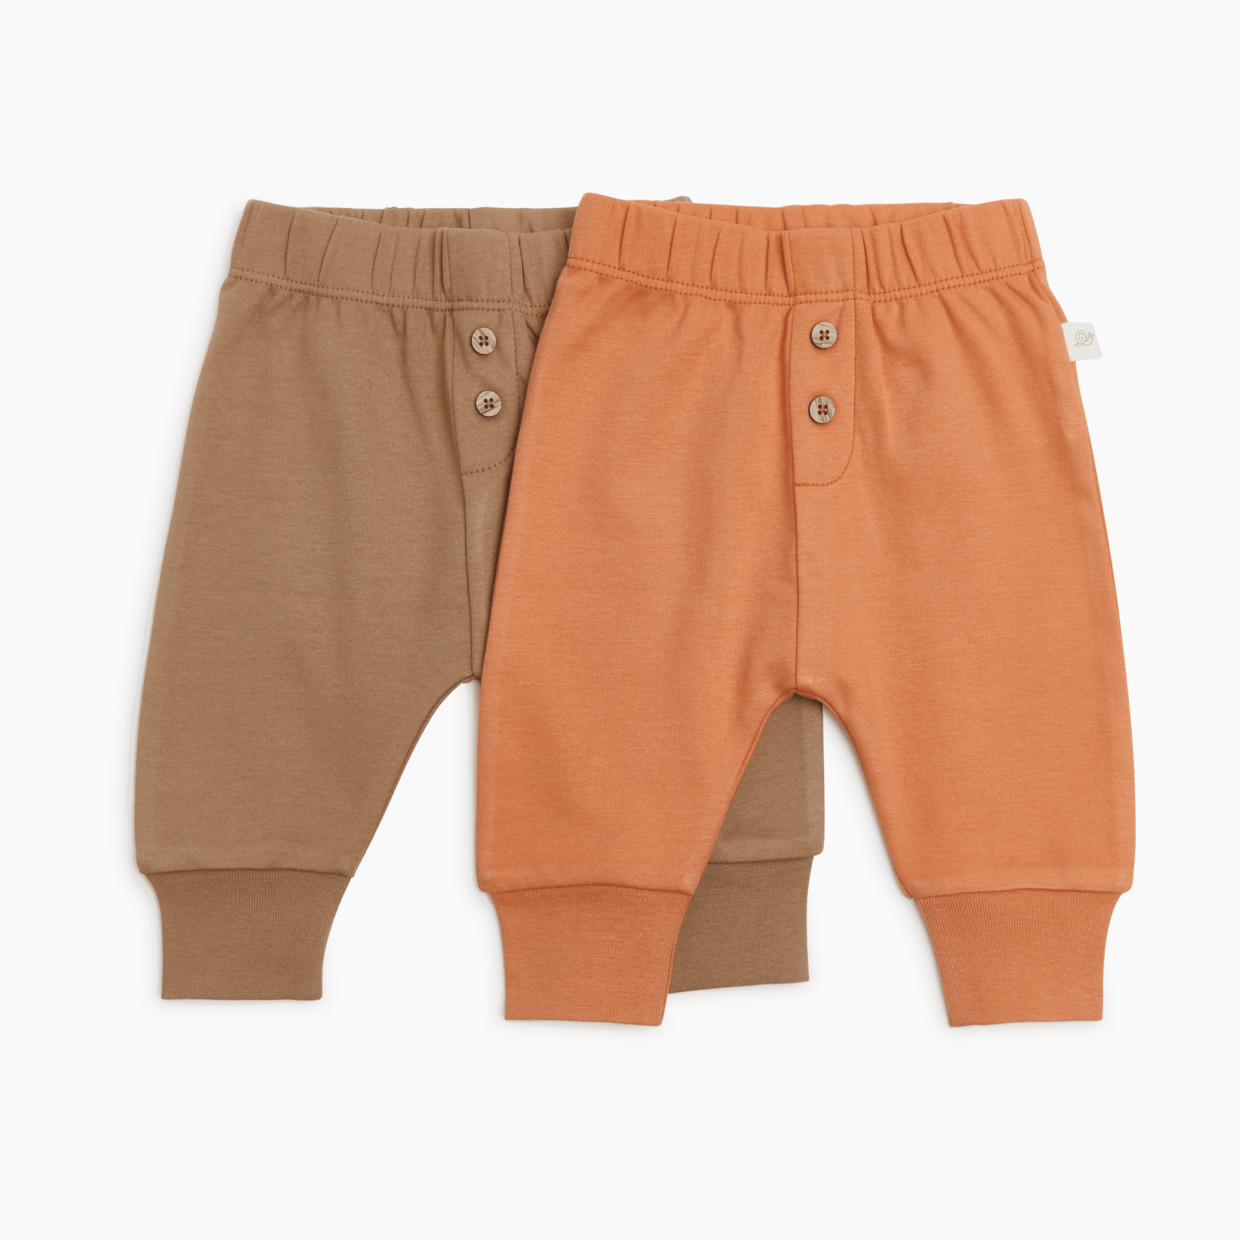 Tiny Kind 2 Pack Pants - Neutral Pack, 0-3 M.